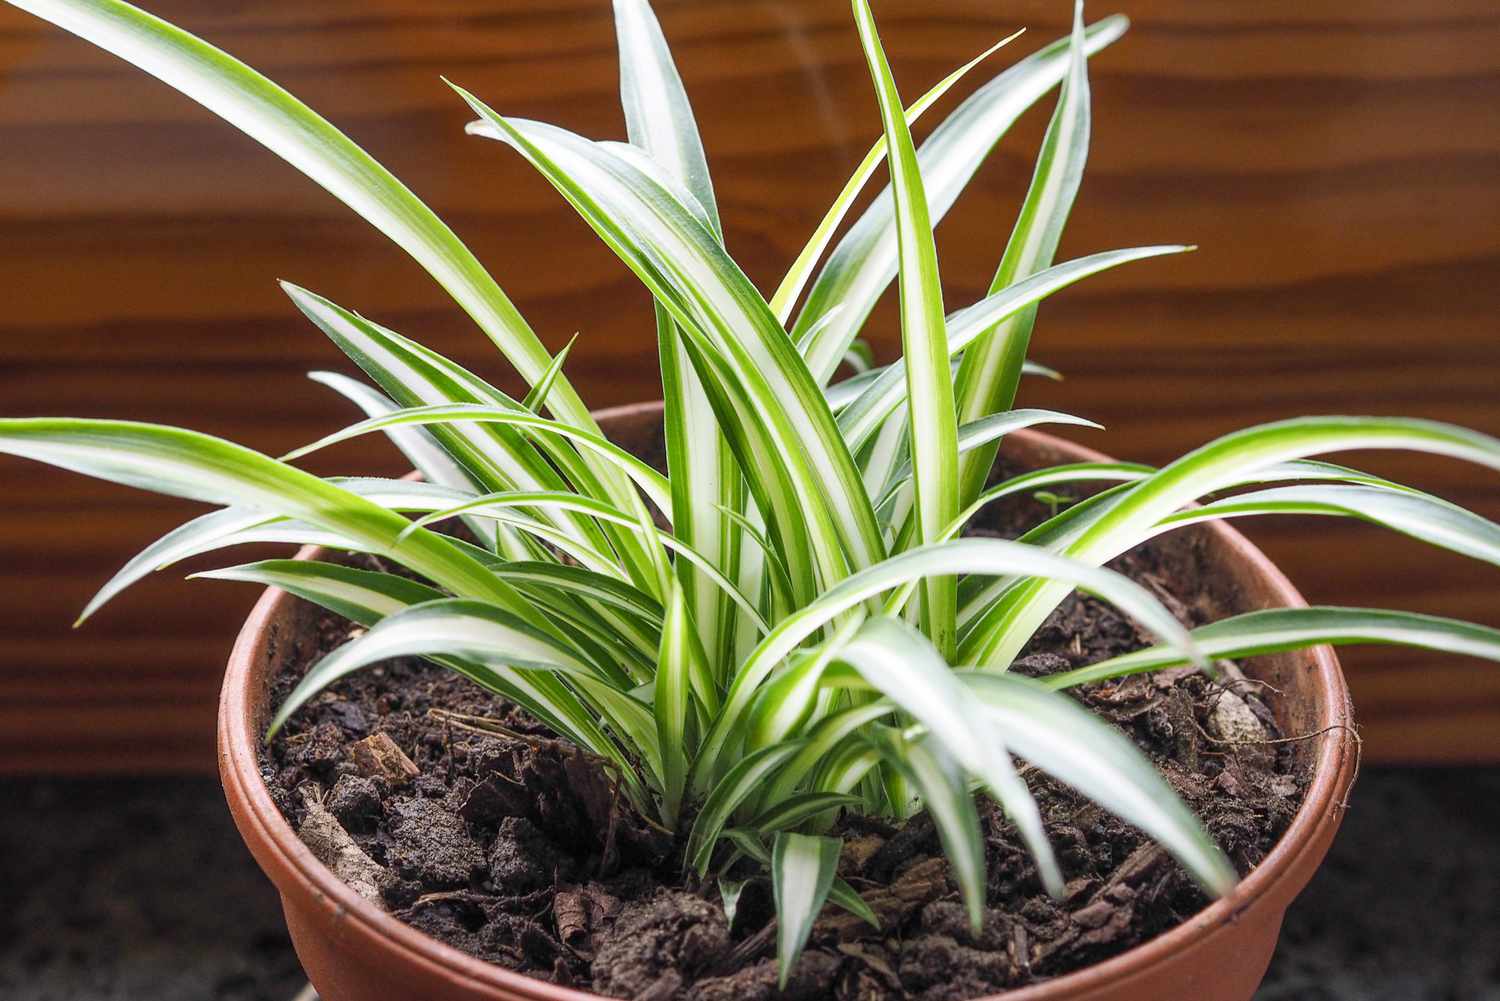 Chlorophytum comosum also known as the spider plant